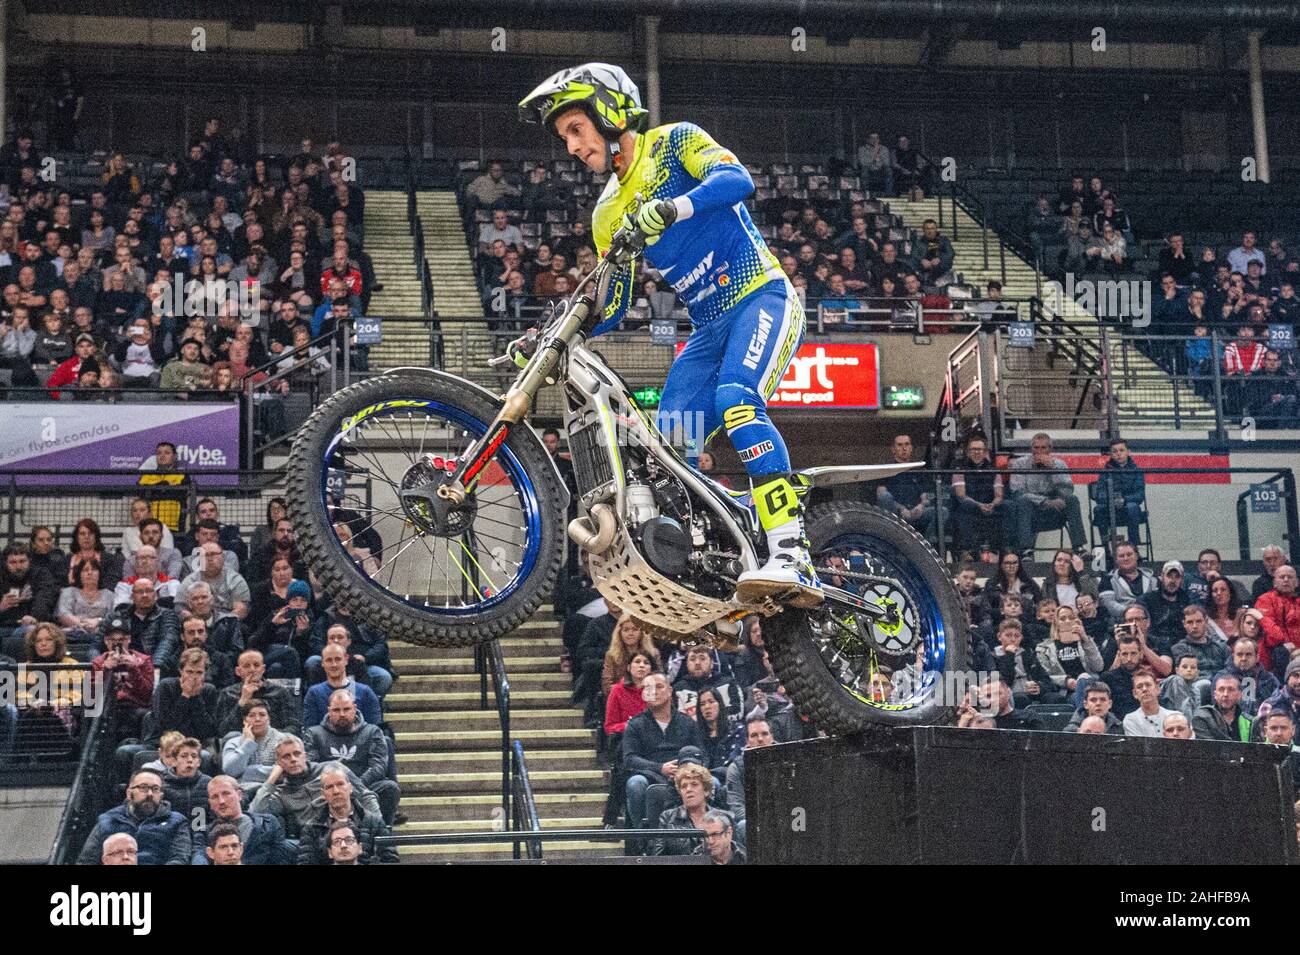 Sheffield, UK. 28th Dec, 2019. Jeroni Fajardo, Spain (Sherco) on section 2 during the 25th Anniversary Sheffield Indoor Trial at the FlyDSA Arena, Sheffield on Saturday 28th December 2019. (Credit: Ian Charles | MI News) Credit: MI News & Sport /Alamy Live News Stock Photo